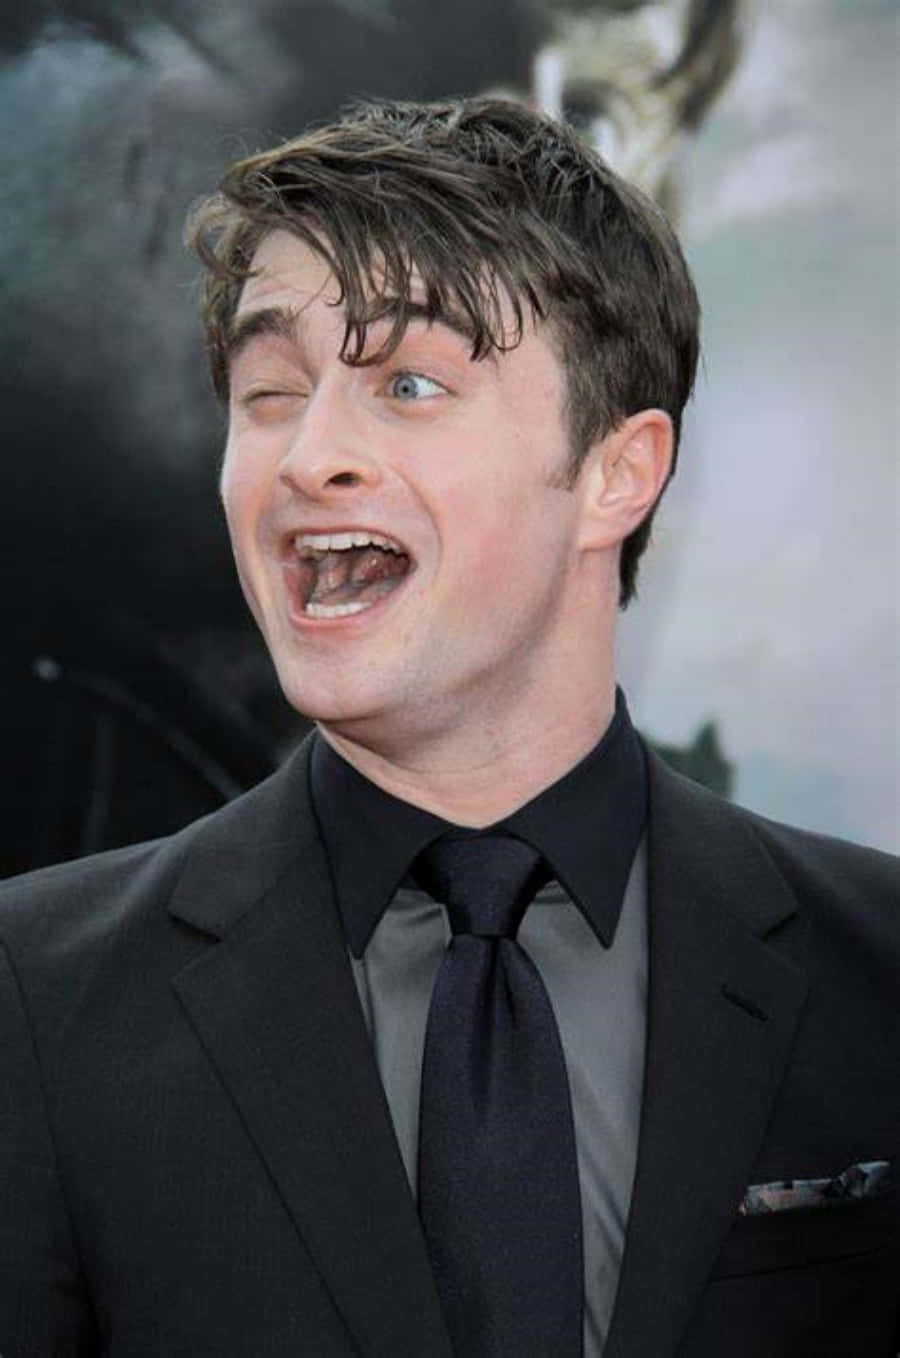 Daniel Radcliffe Funny Celebrity Pictures